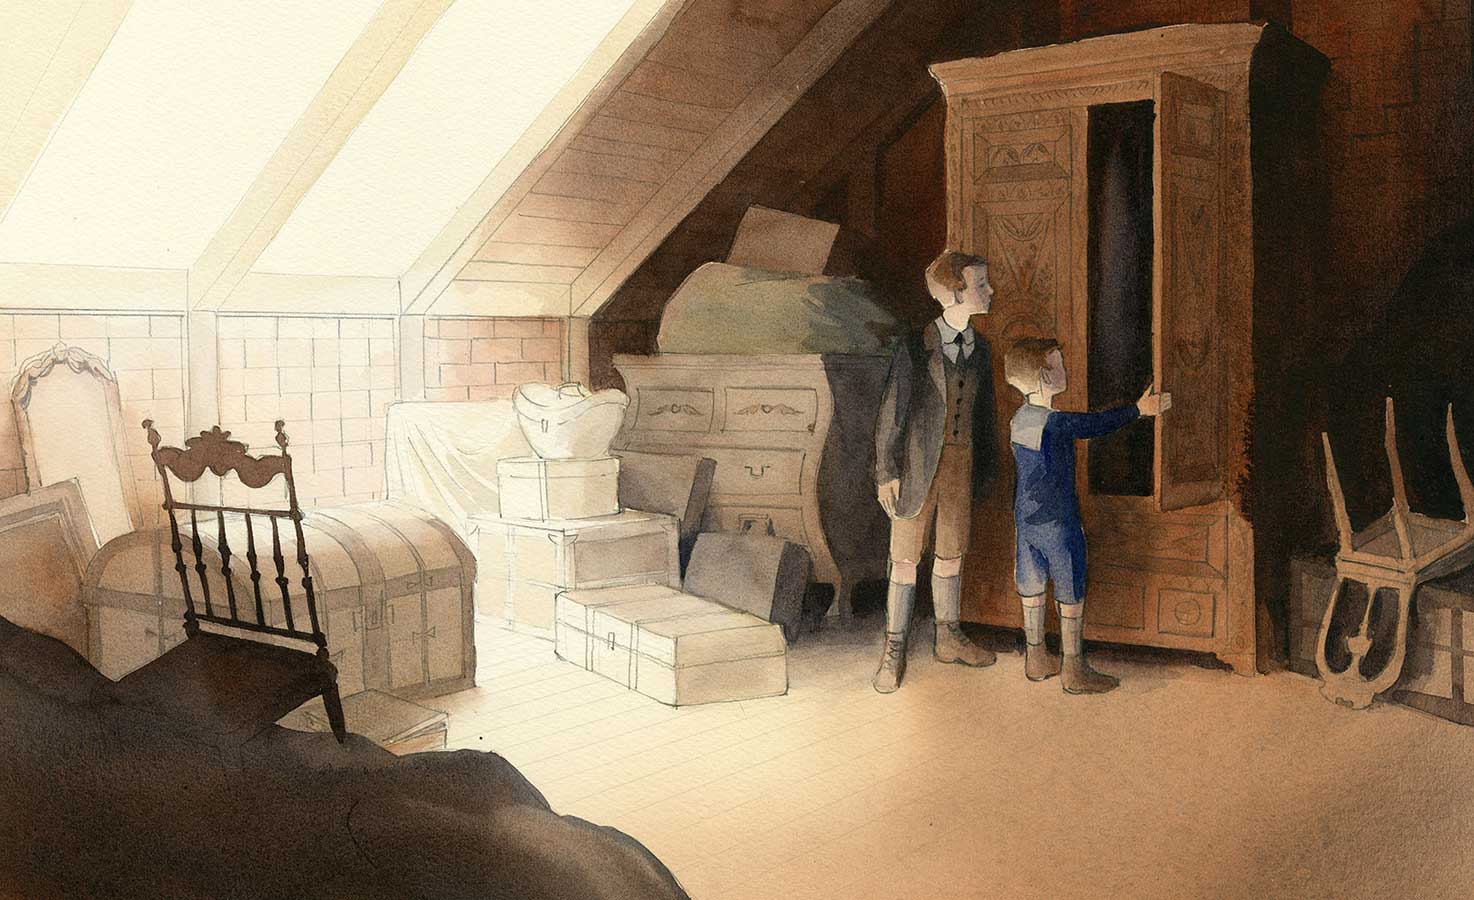 Watercolor illustration from 'Finding Narnia' showing two boys in a dusty, cluttered attic opening the door to an old wooden wardrobe.